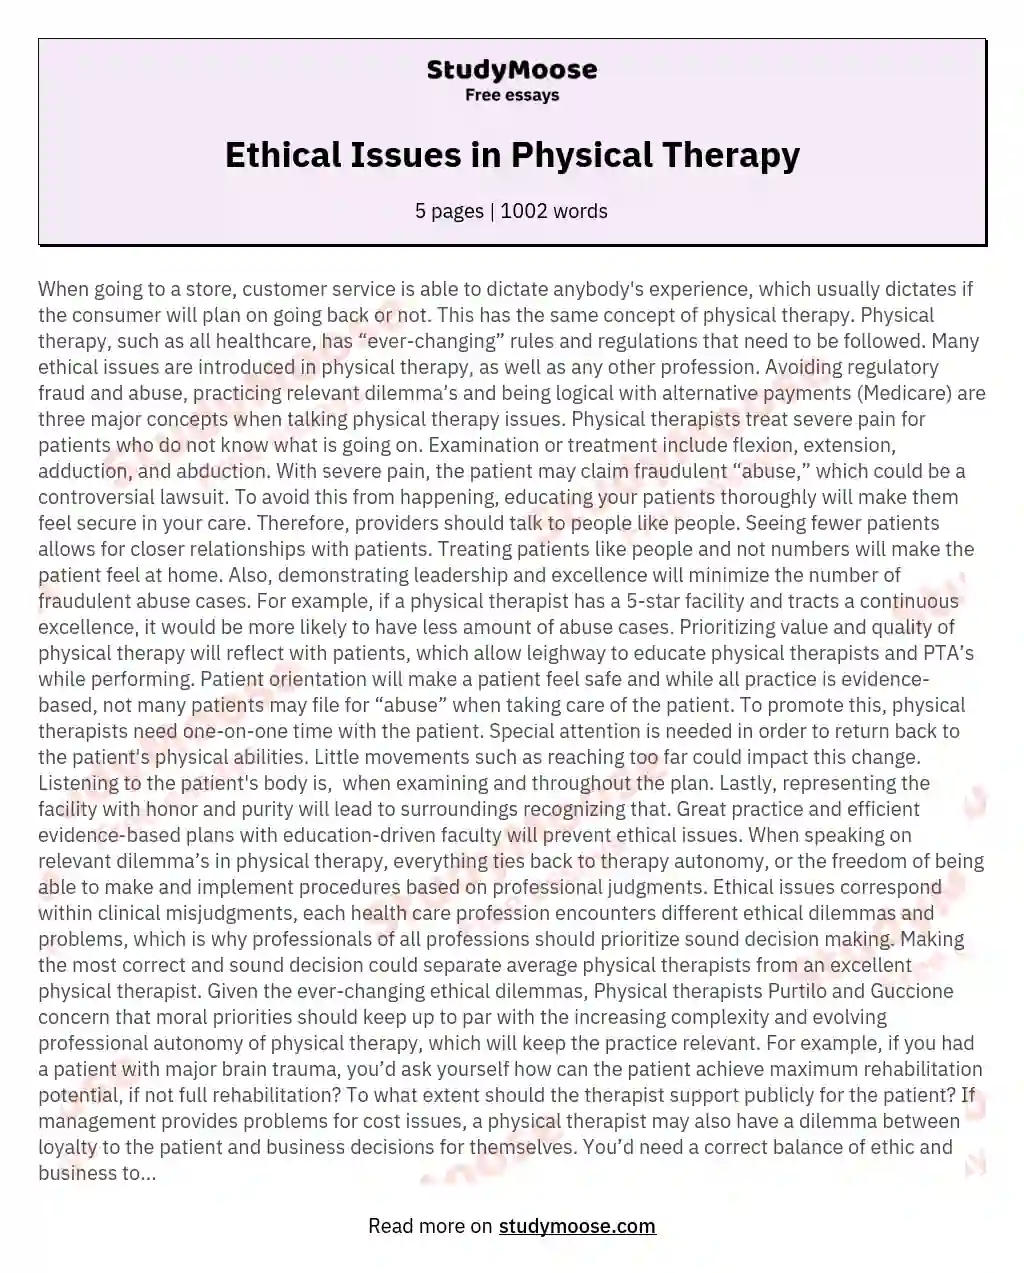 professionalism in physical therapy essay